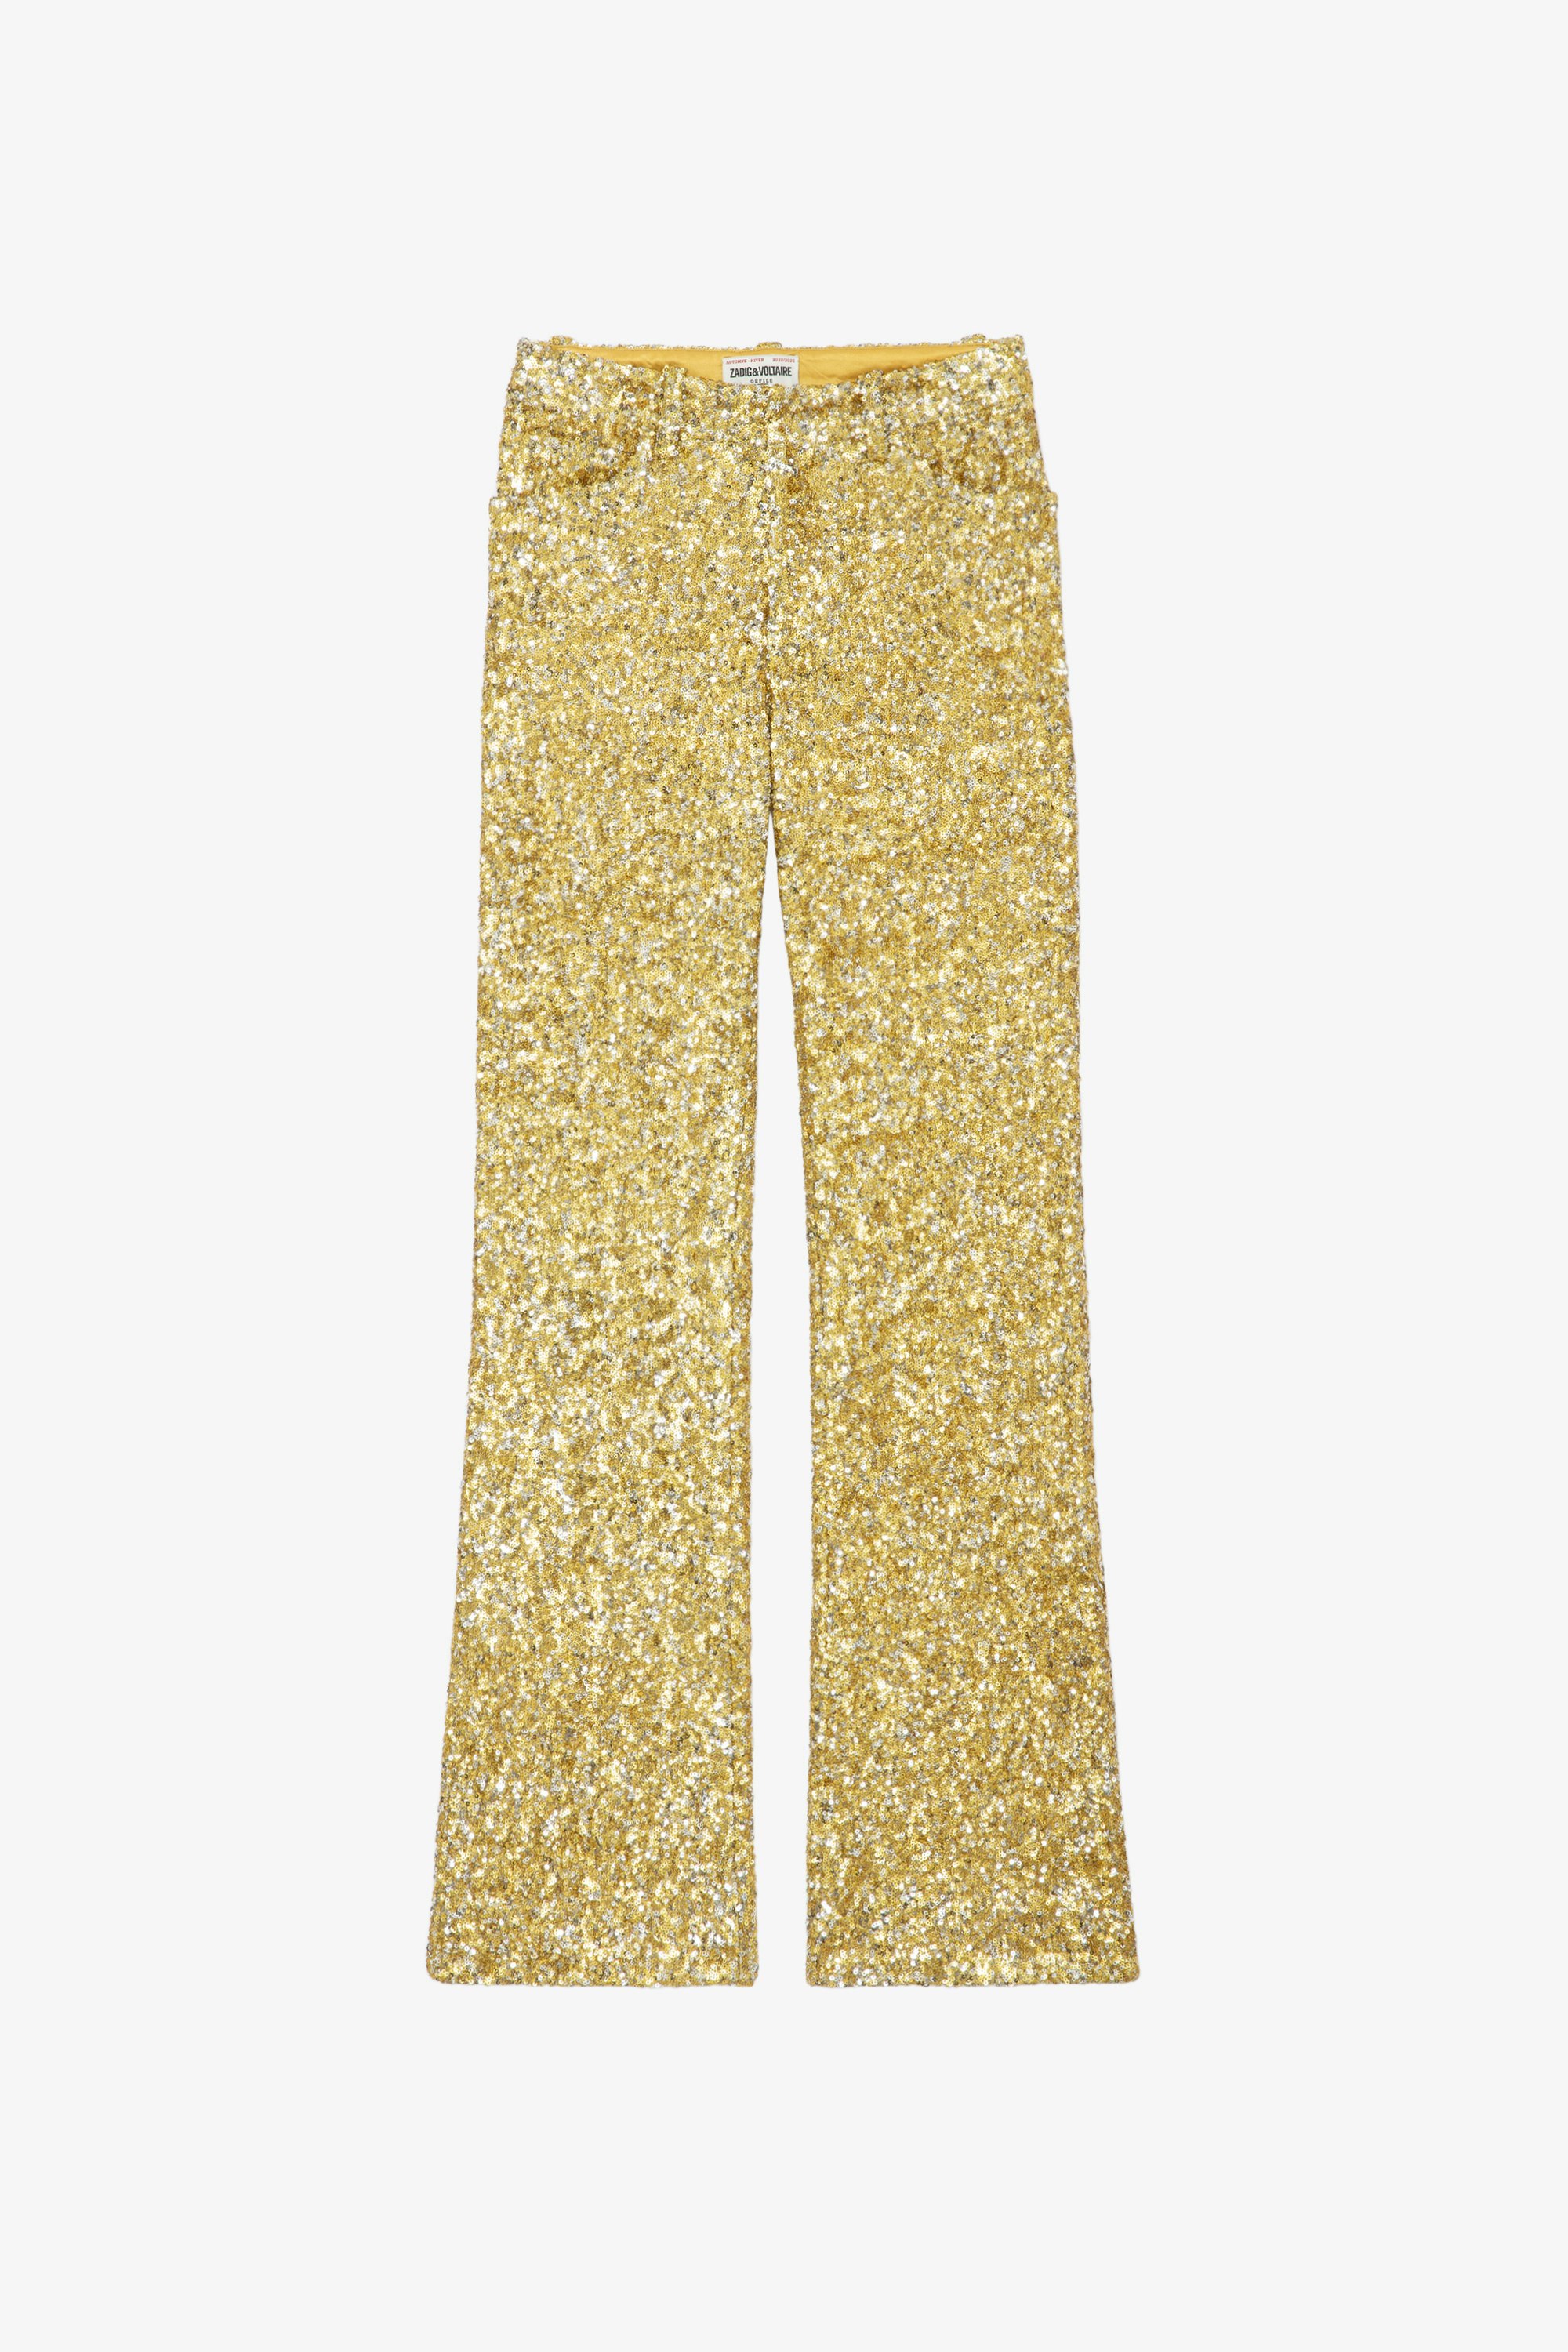 Pistol パンツ Women's gold sequinned tailored trousers 